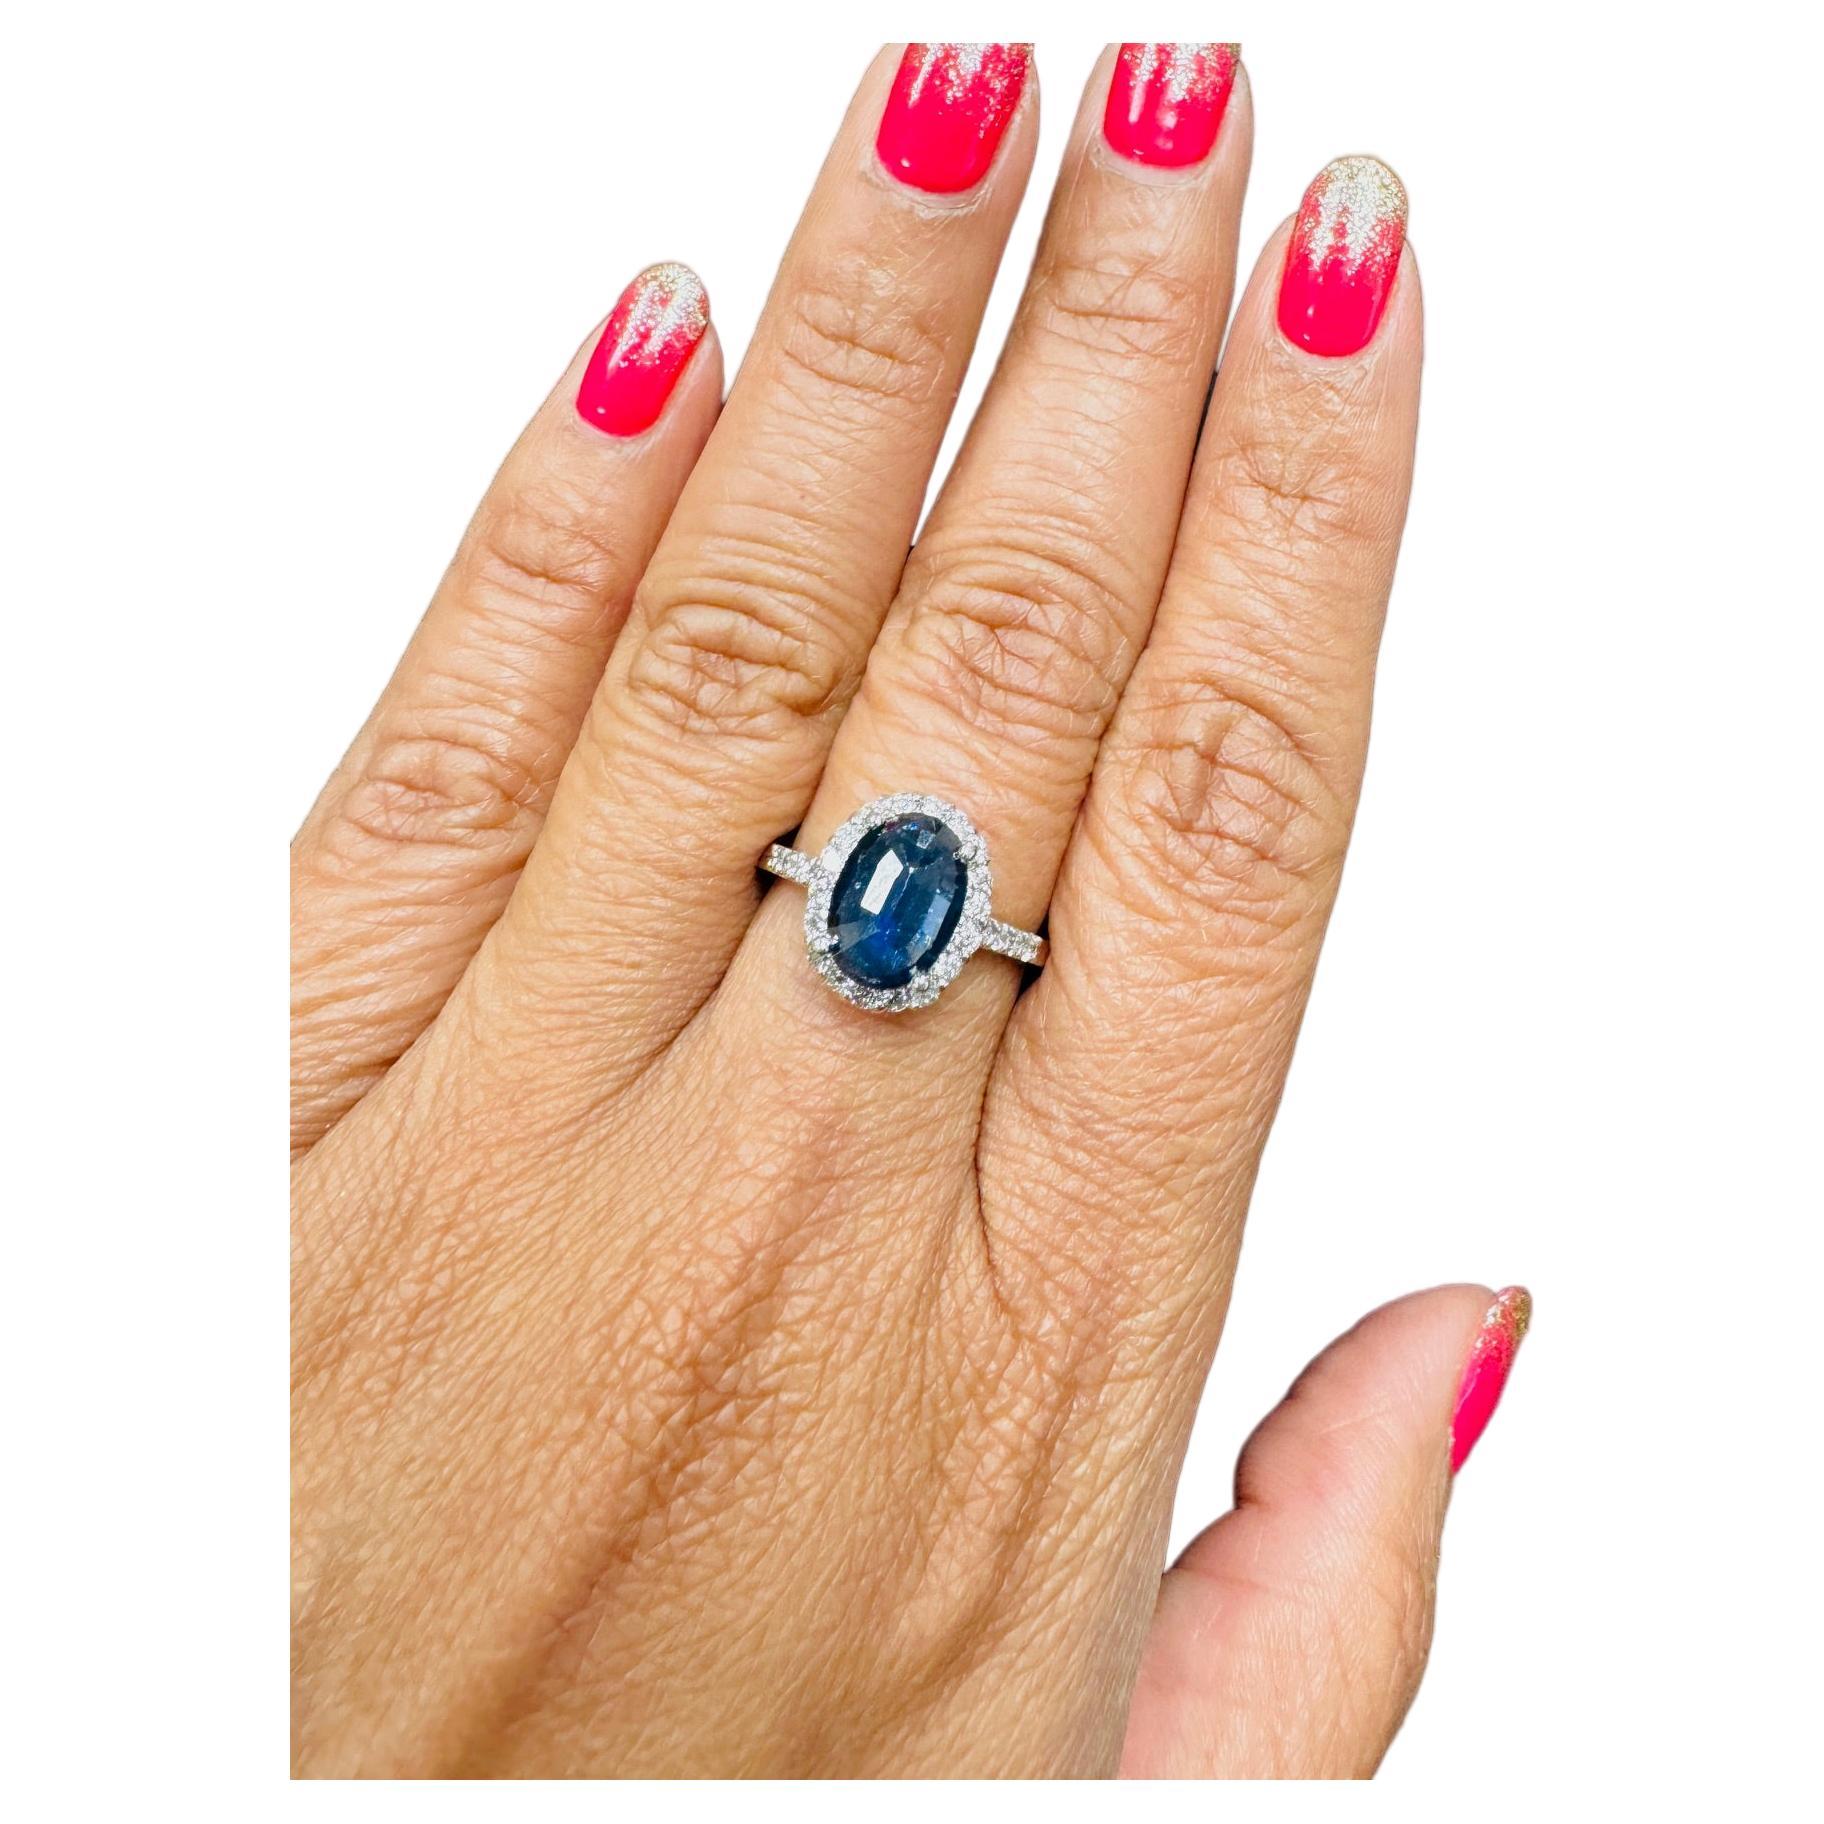 Gorgeous 2.61 Carat Sapphire and Diamond ring that can easily be worn as a unique Engagement ring!  

The Deep Midnight Blue Oval~Rose Cut Sapphire weighs 2.14 Carats and is surrounded by 26 Round Cut Diamonds that weigh 0.47 Carats.  The total